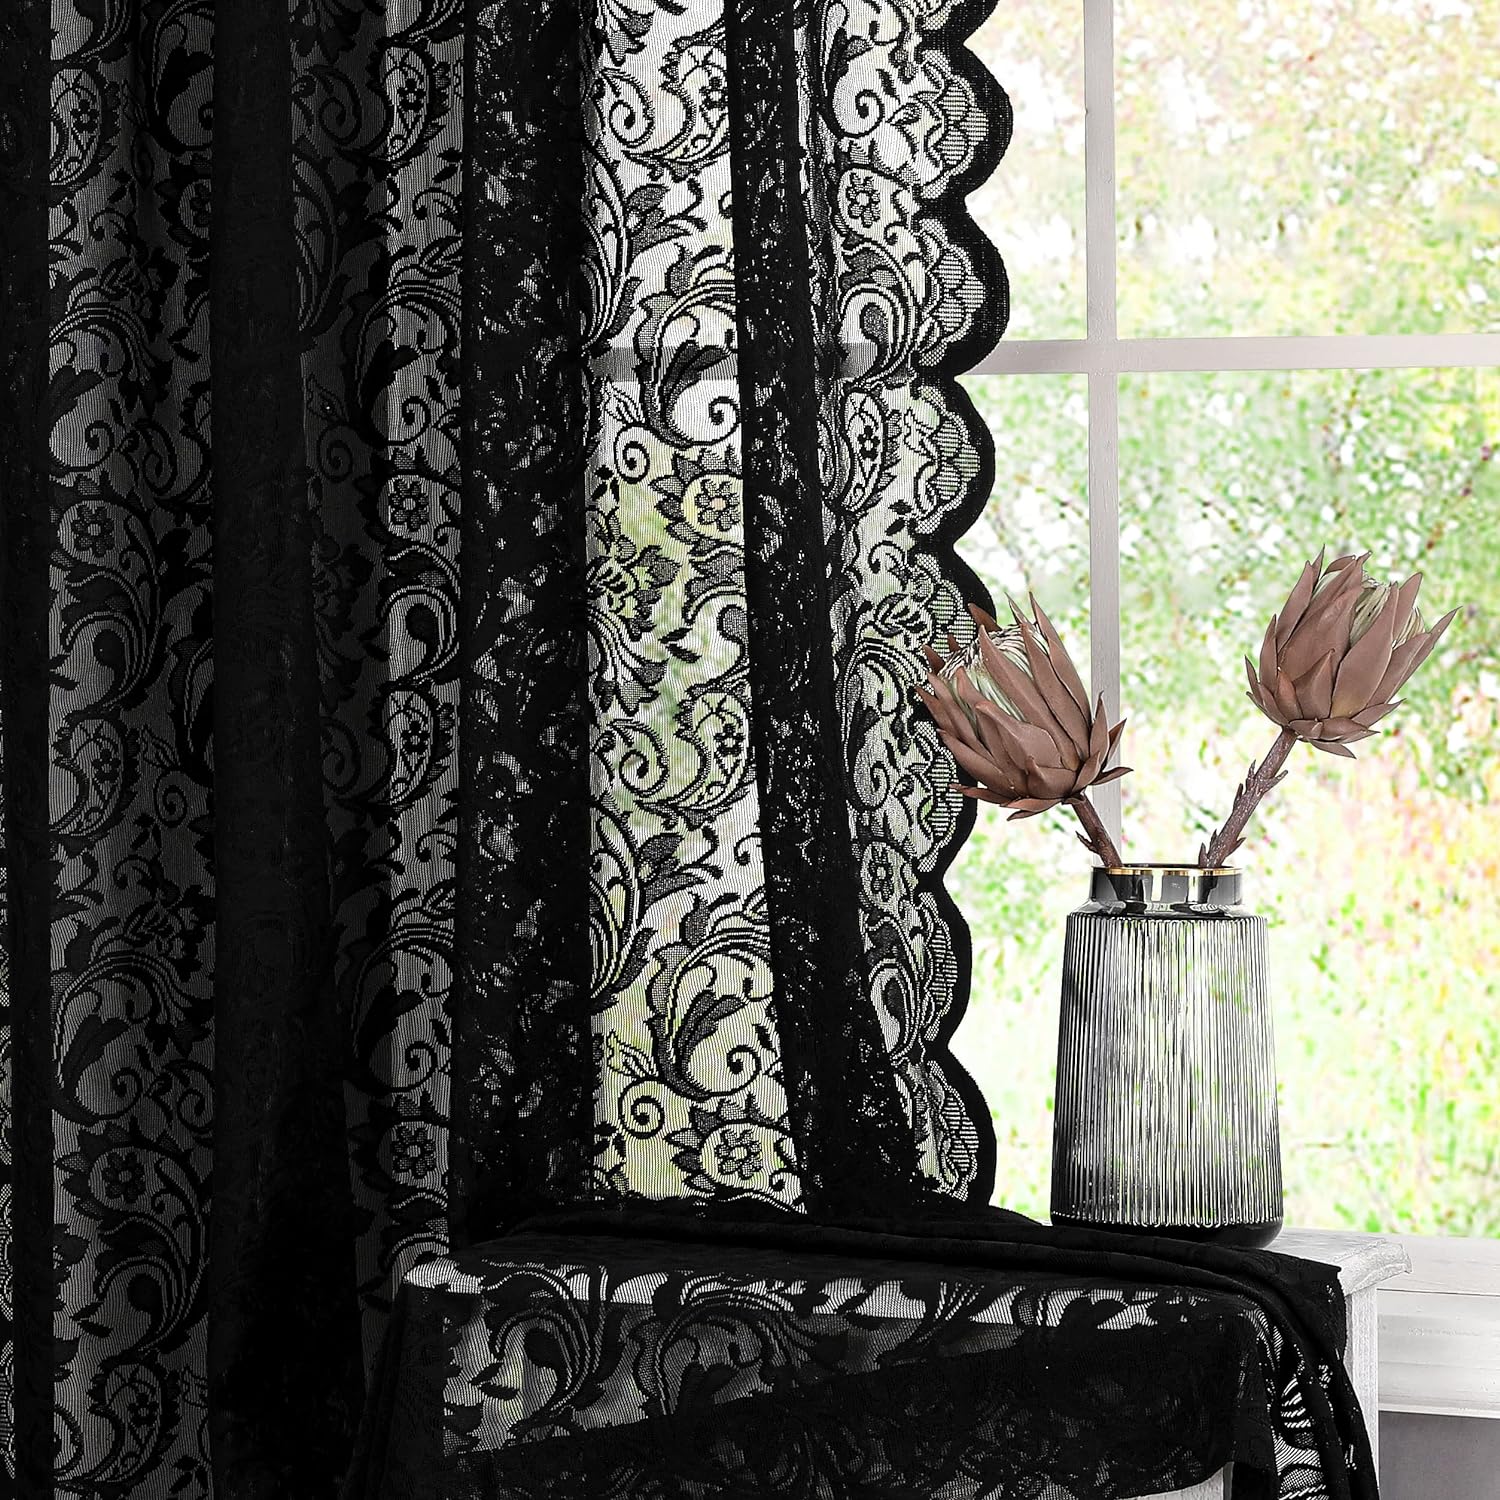 Black curtains for bedroom with embroidery on net fabric. sheer black curtain